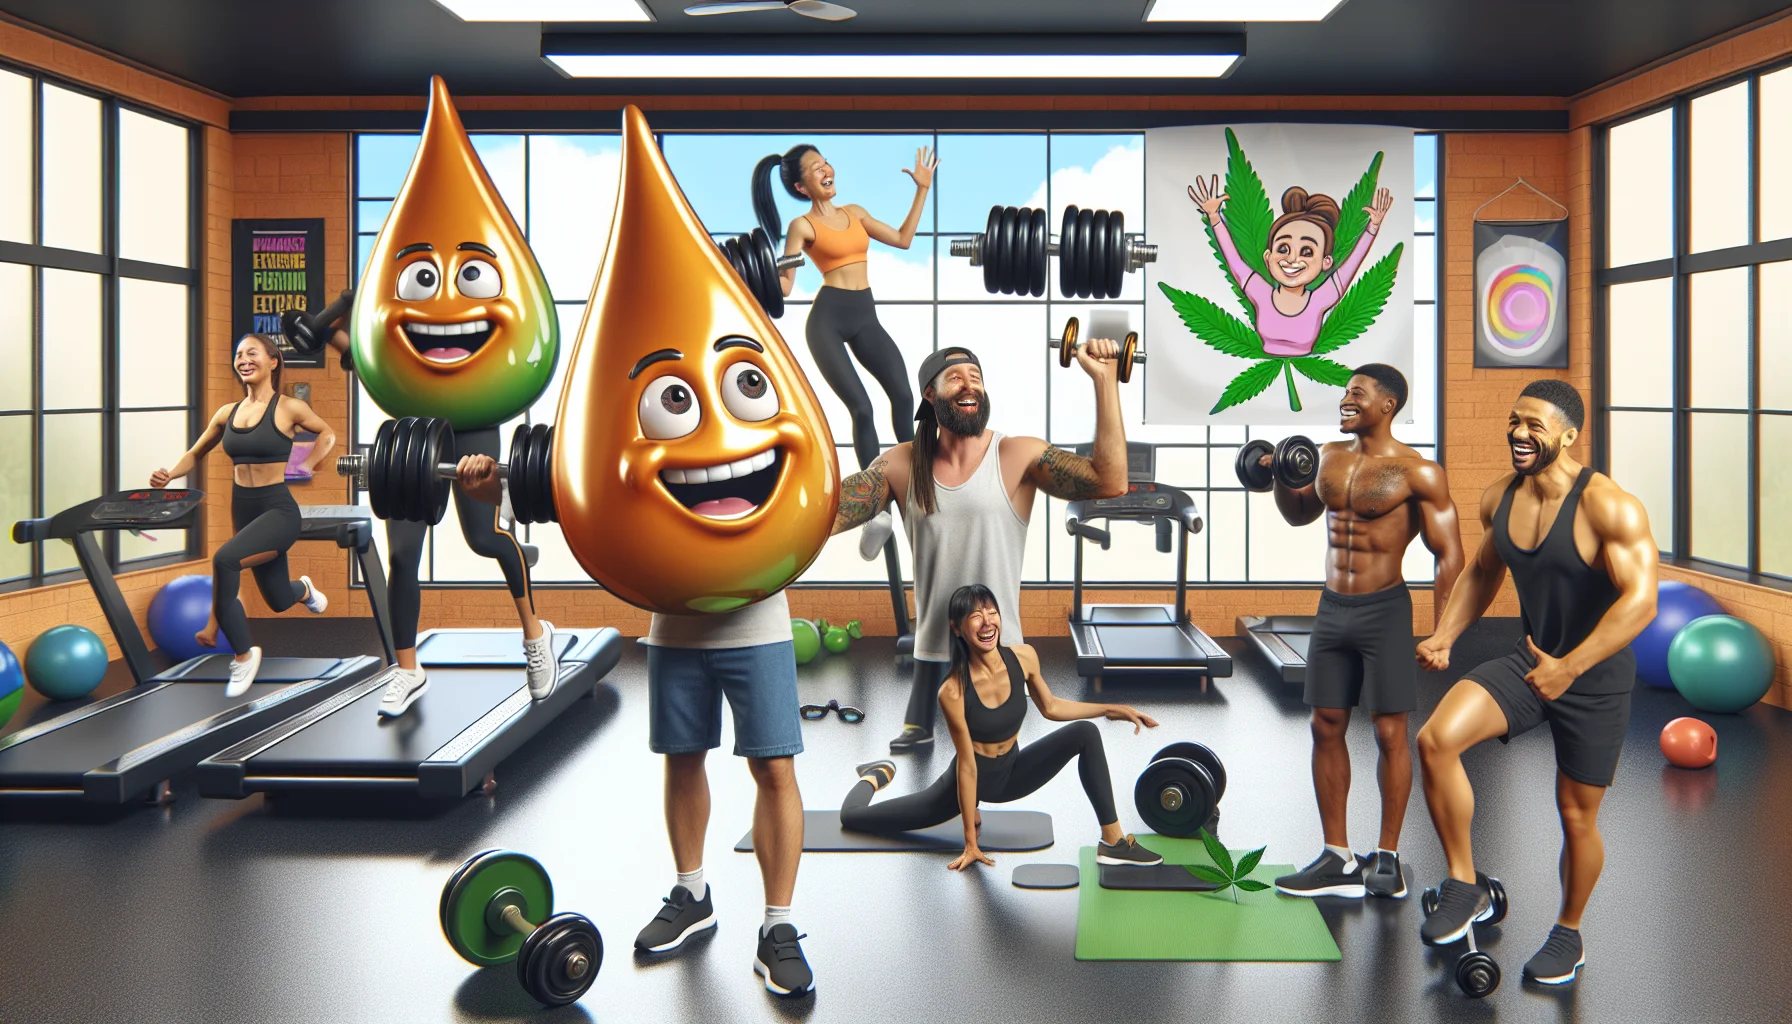 Imagine a humorous and engaging scene promoting the benefits of CBD oil in a fitness regime. Picture a vibrant gym setting with various individuals exercising. On the left is a Caucasian man lifting weights with much ease, a bemused expression on his face. Beside him, an Asian woman is laughing while doing yoga, showing exceptional flexibility. To the right, a Black male trainer is encouraging a Middle-Eastern woman on a treadmill, both of them smiling broadly. Oversized droplets of CBD oil are animatedly jumping around the room, joining people in exercises, acting like they're boosting people's performance and enjoyment. Fitness equipment and motivational fitness posters adorn the walls.